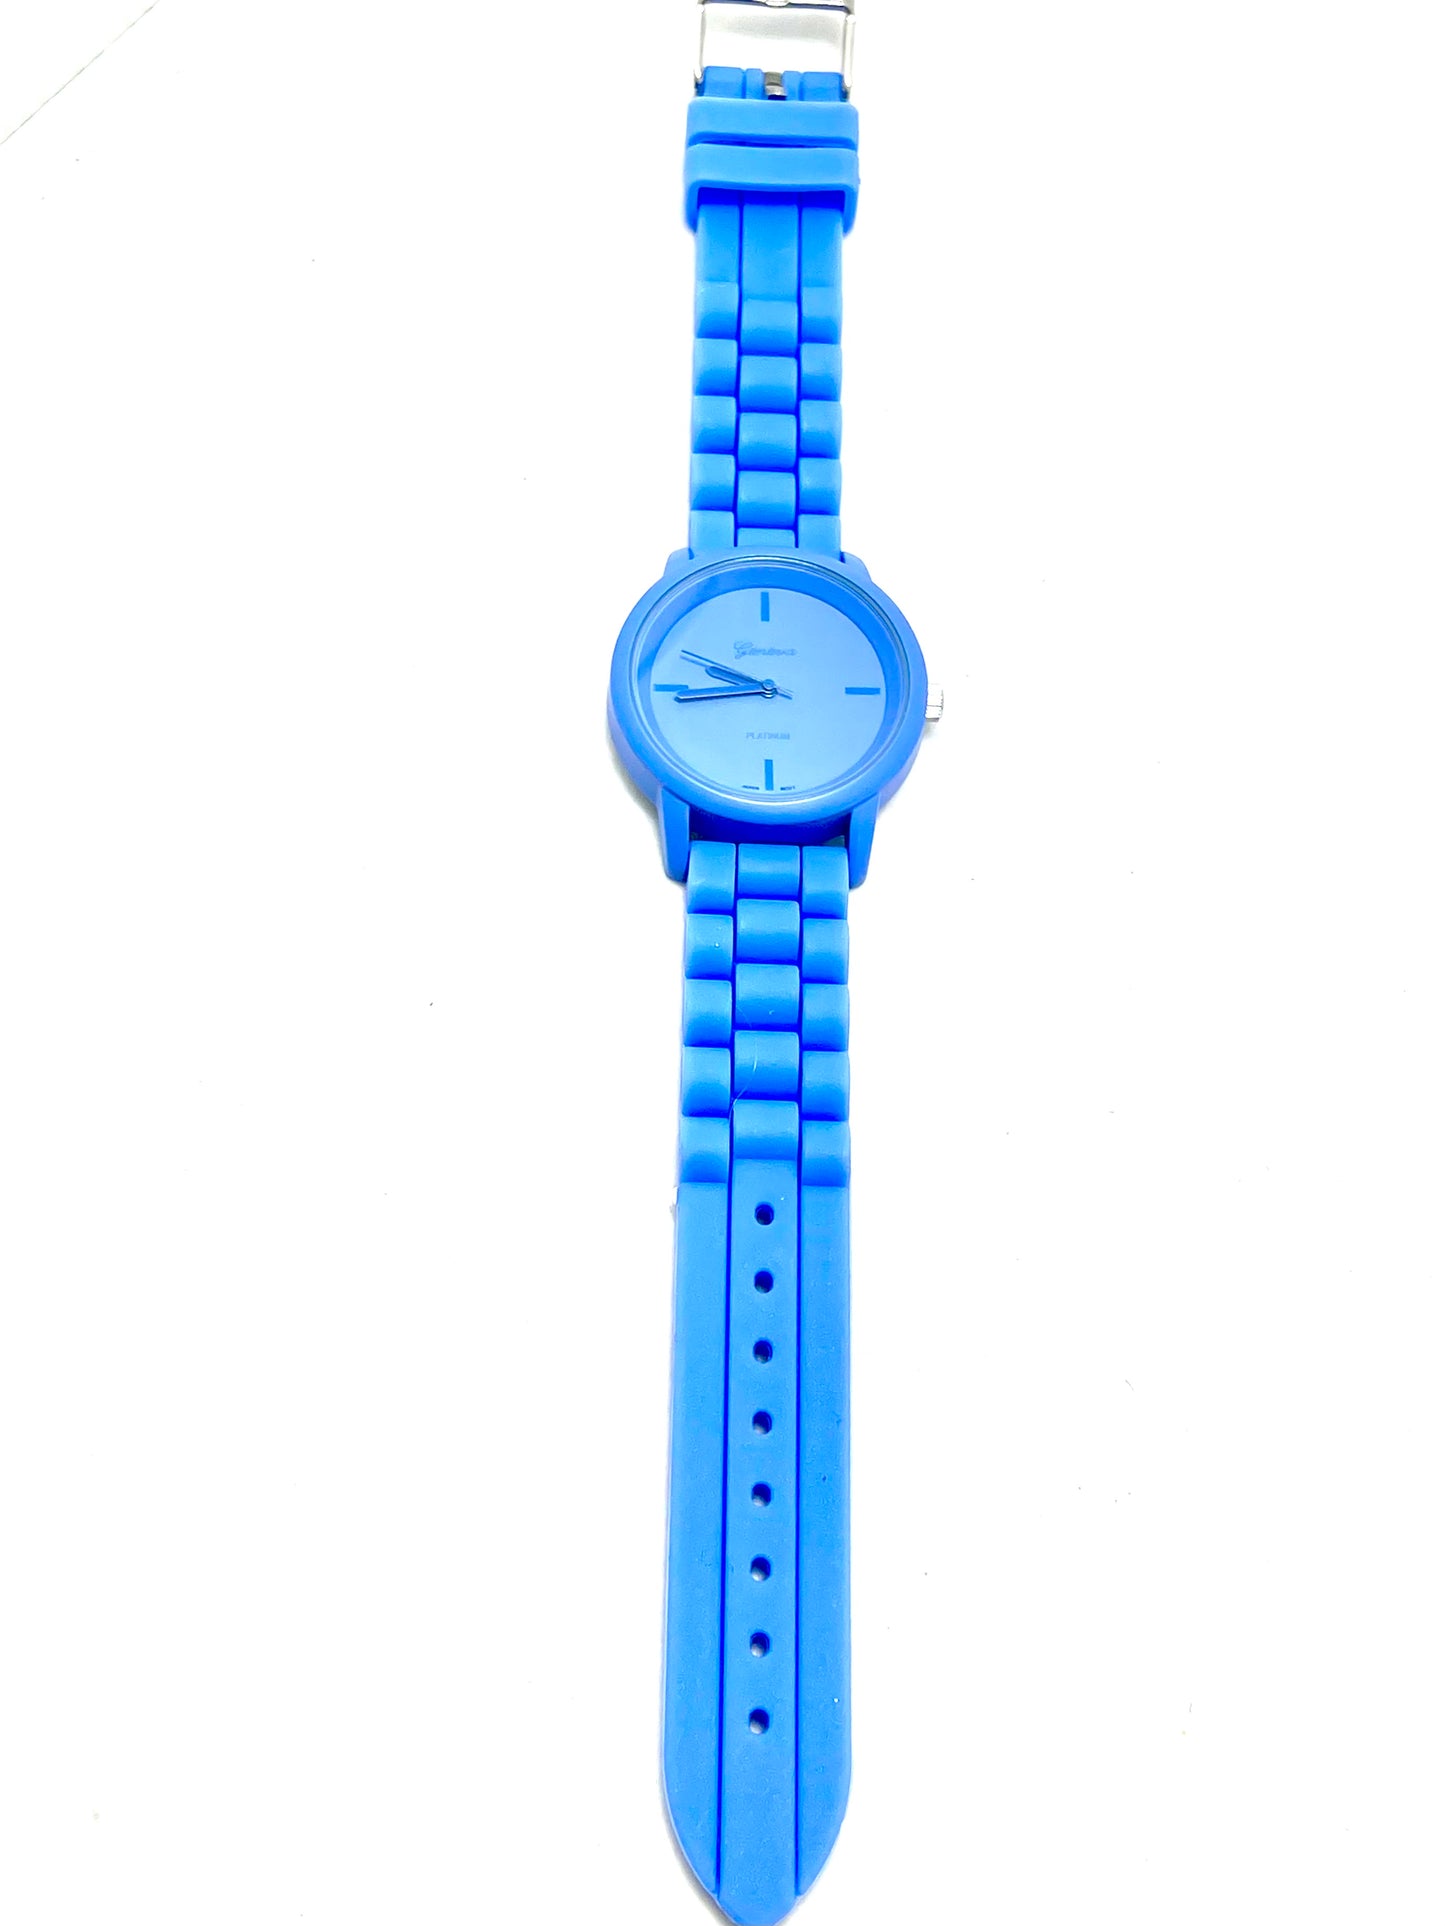 Colored Rubber Watches